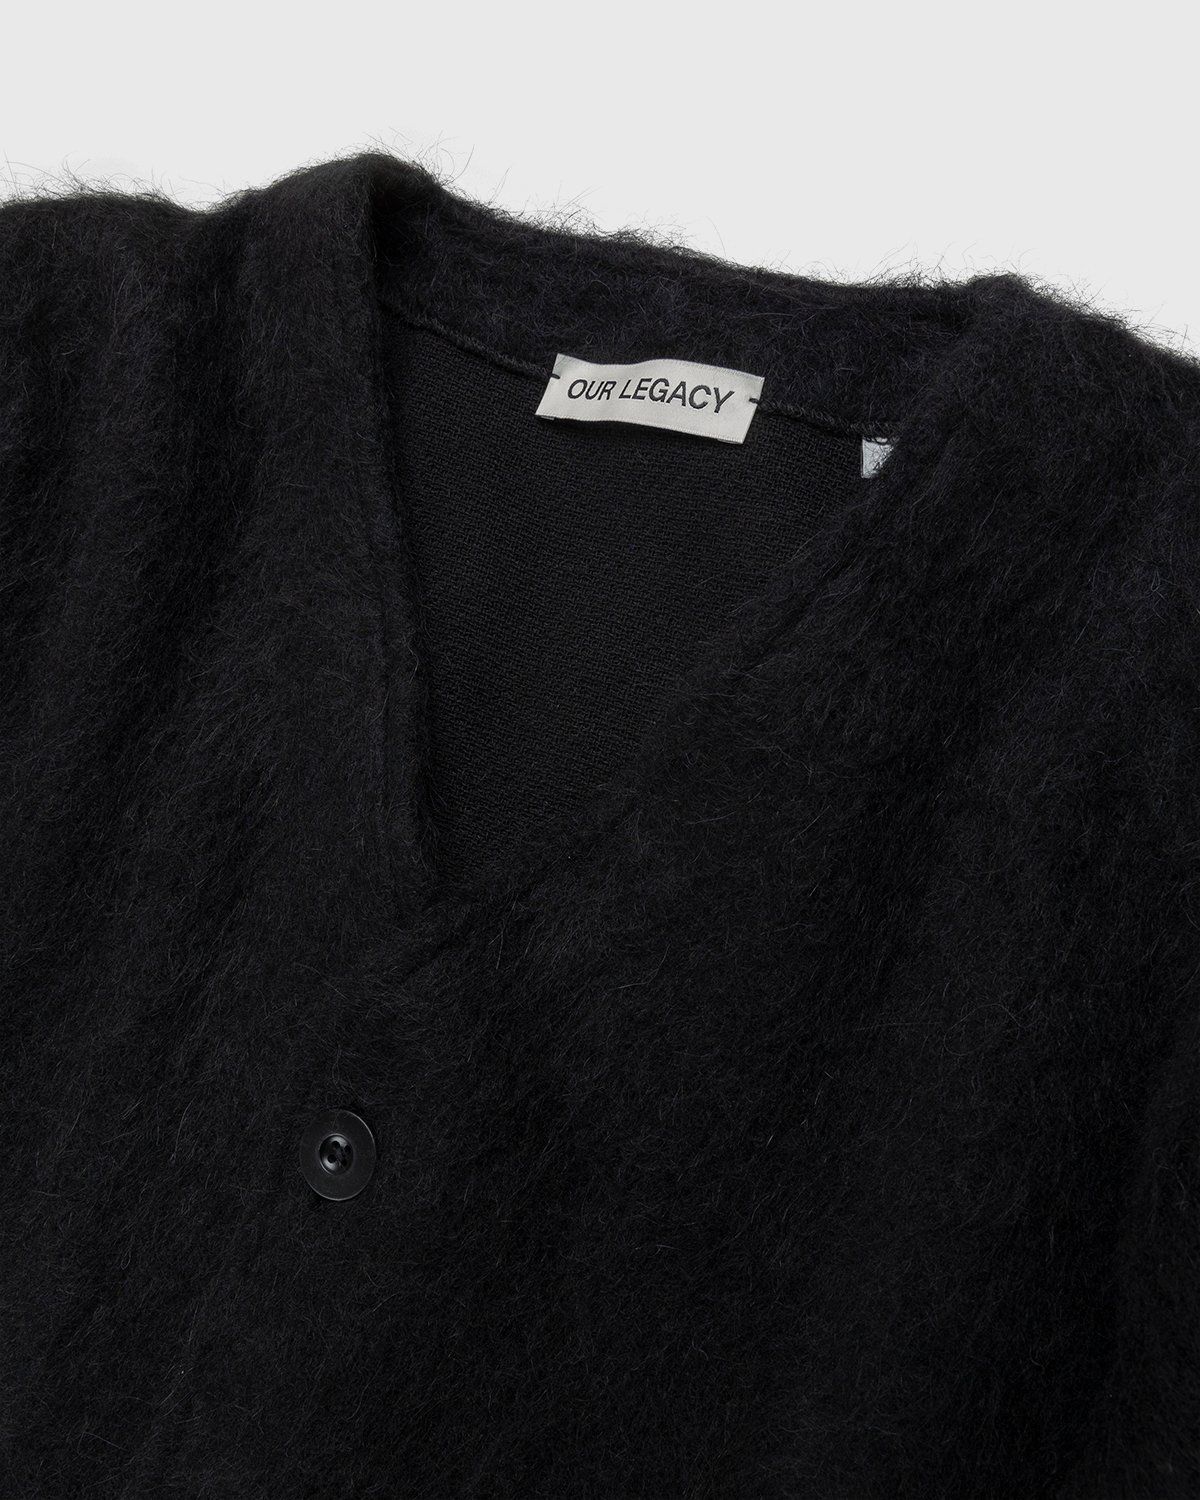 Our Legacy – Mohair Cardigan Black - Image 3